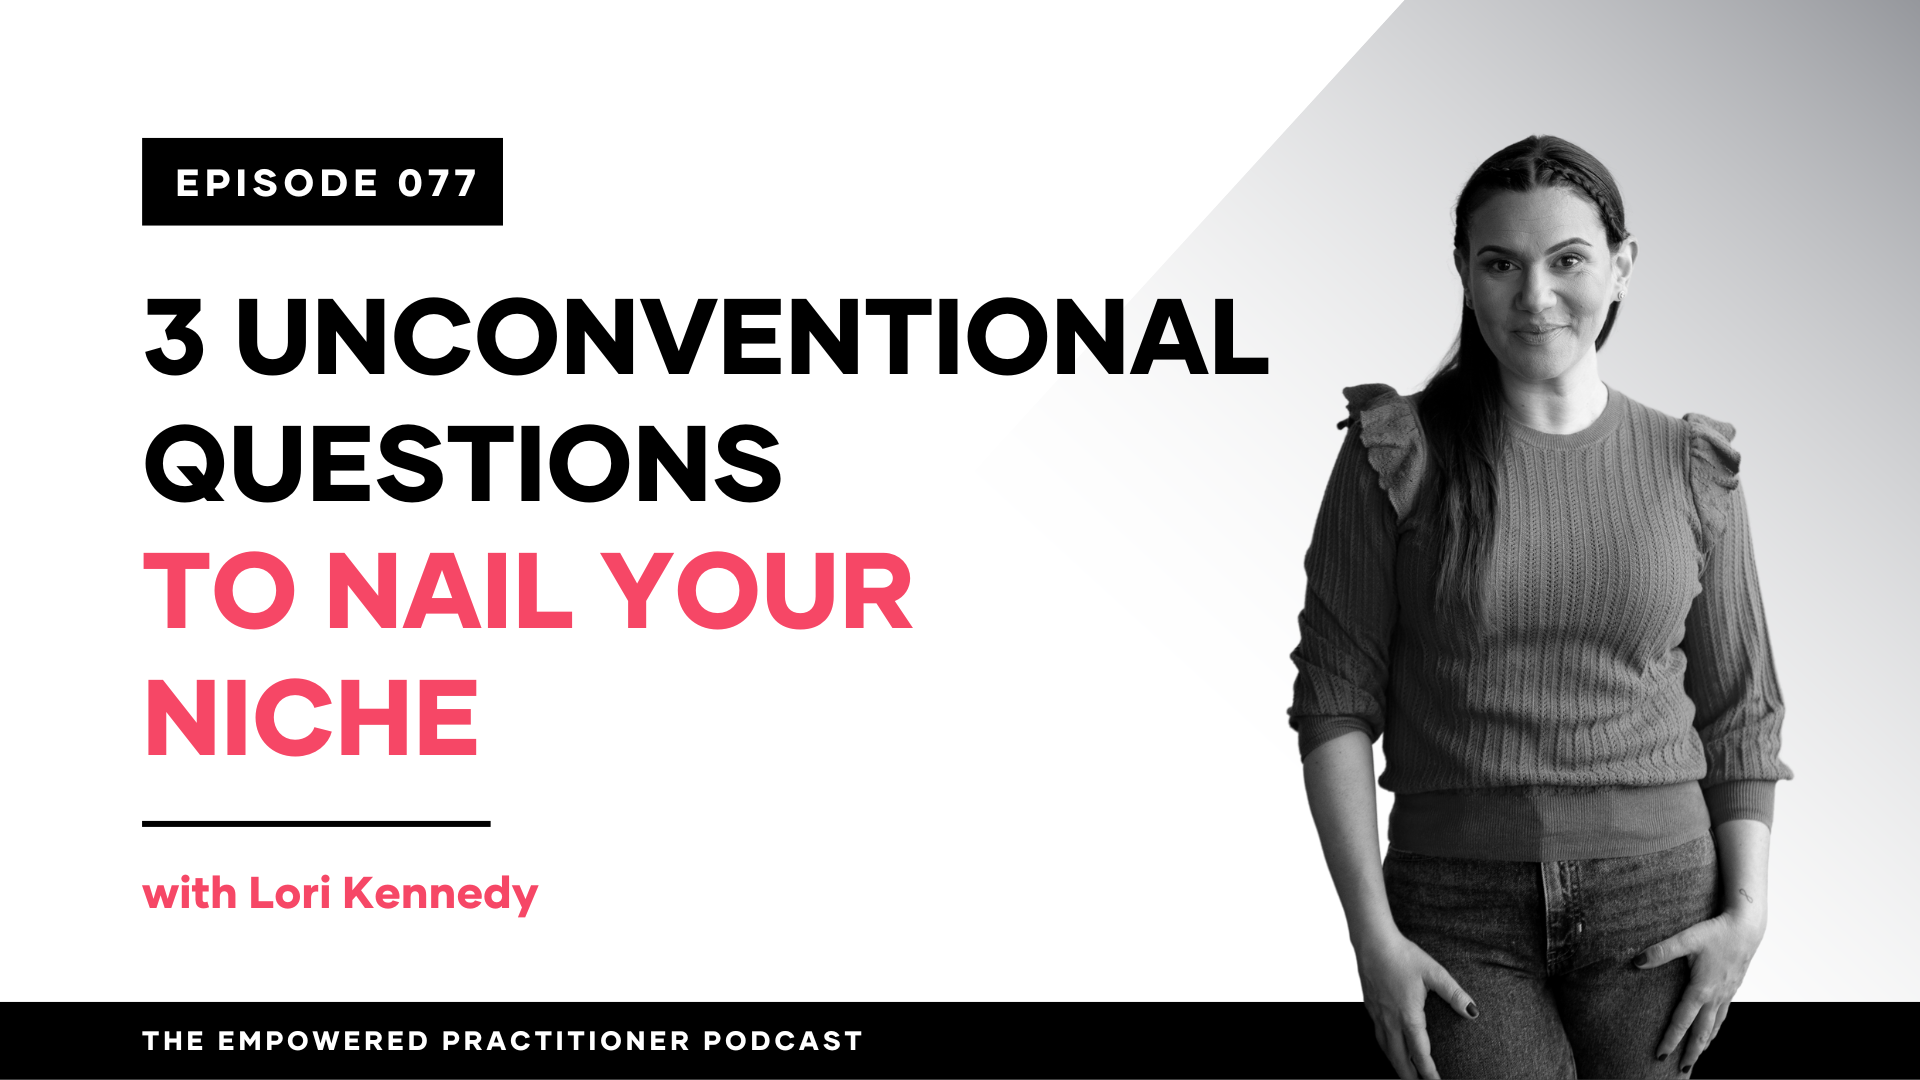 3 Unconventional Questions To Nail Your Niche